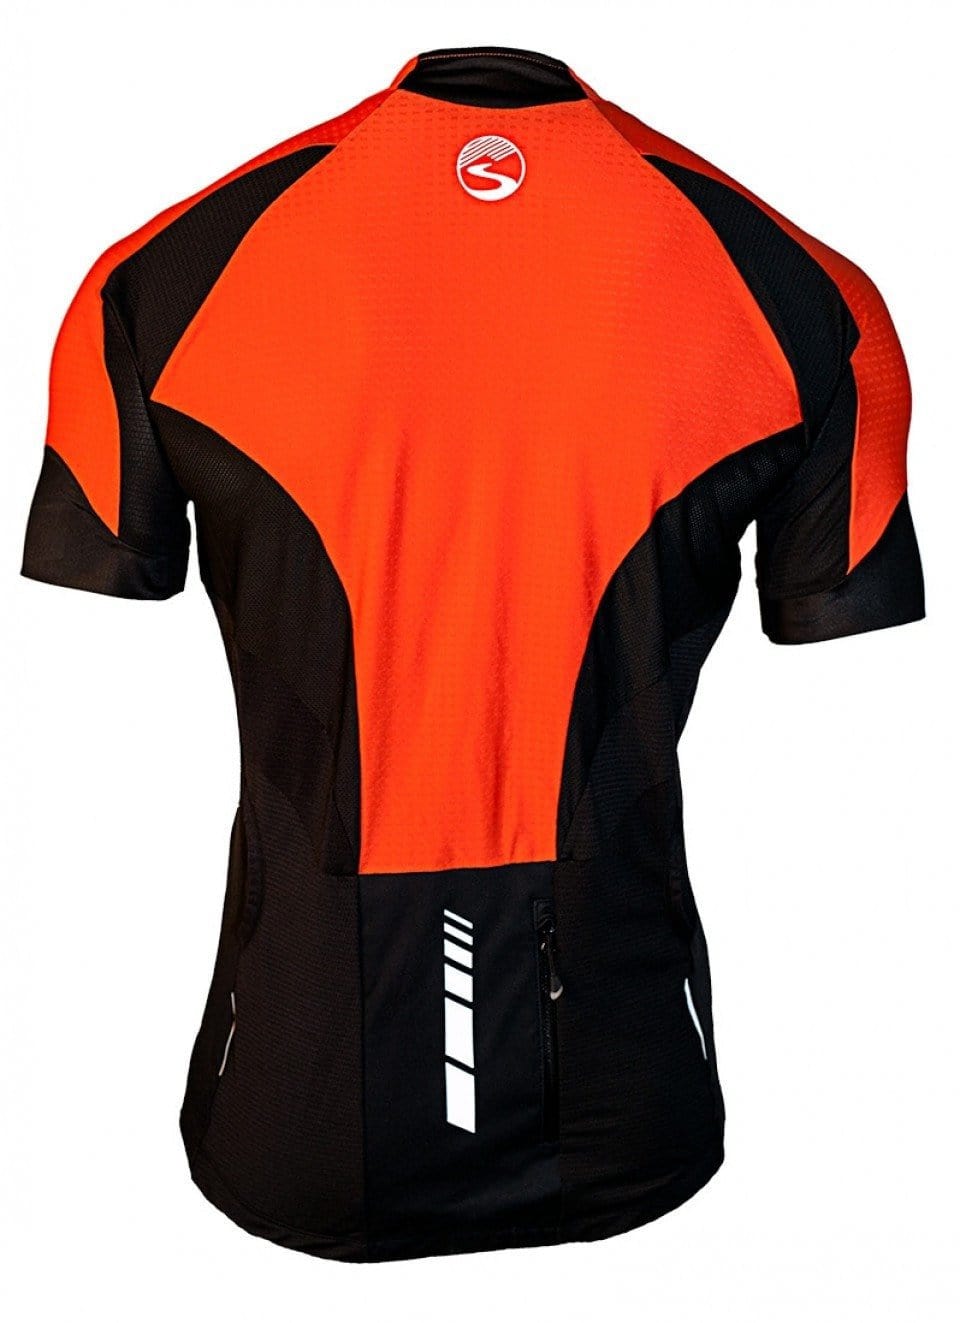 The Cyclone Men's Cycling Jersey